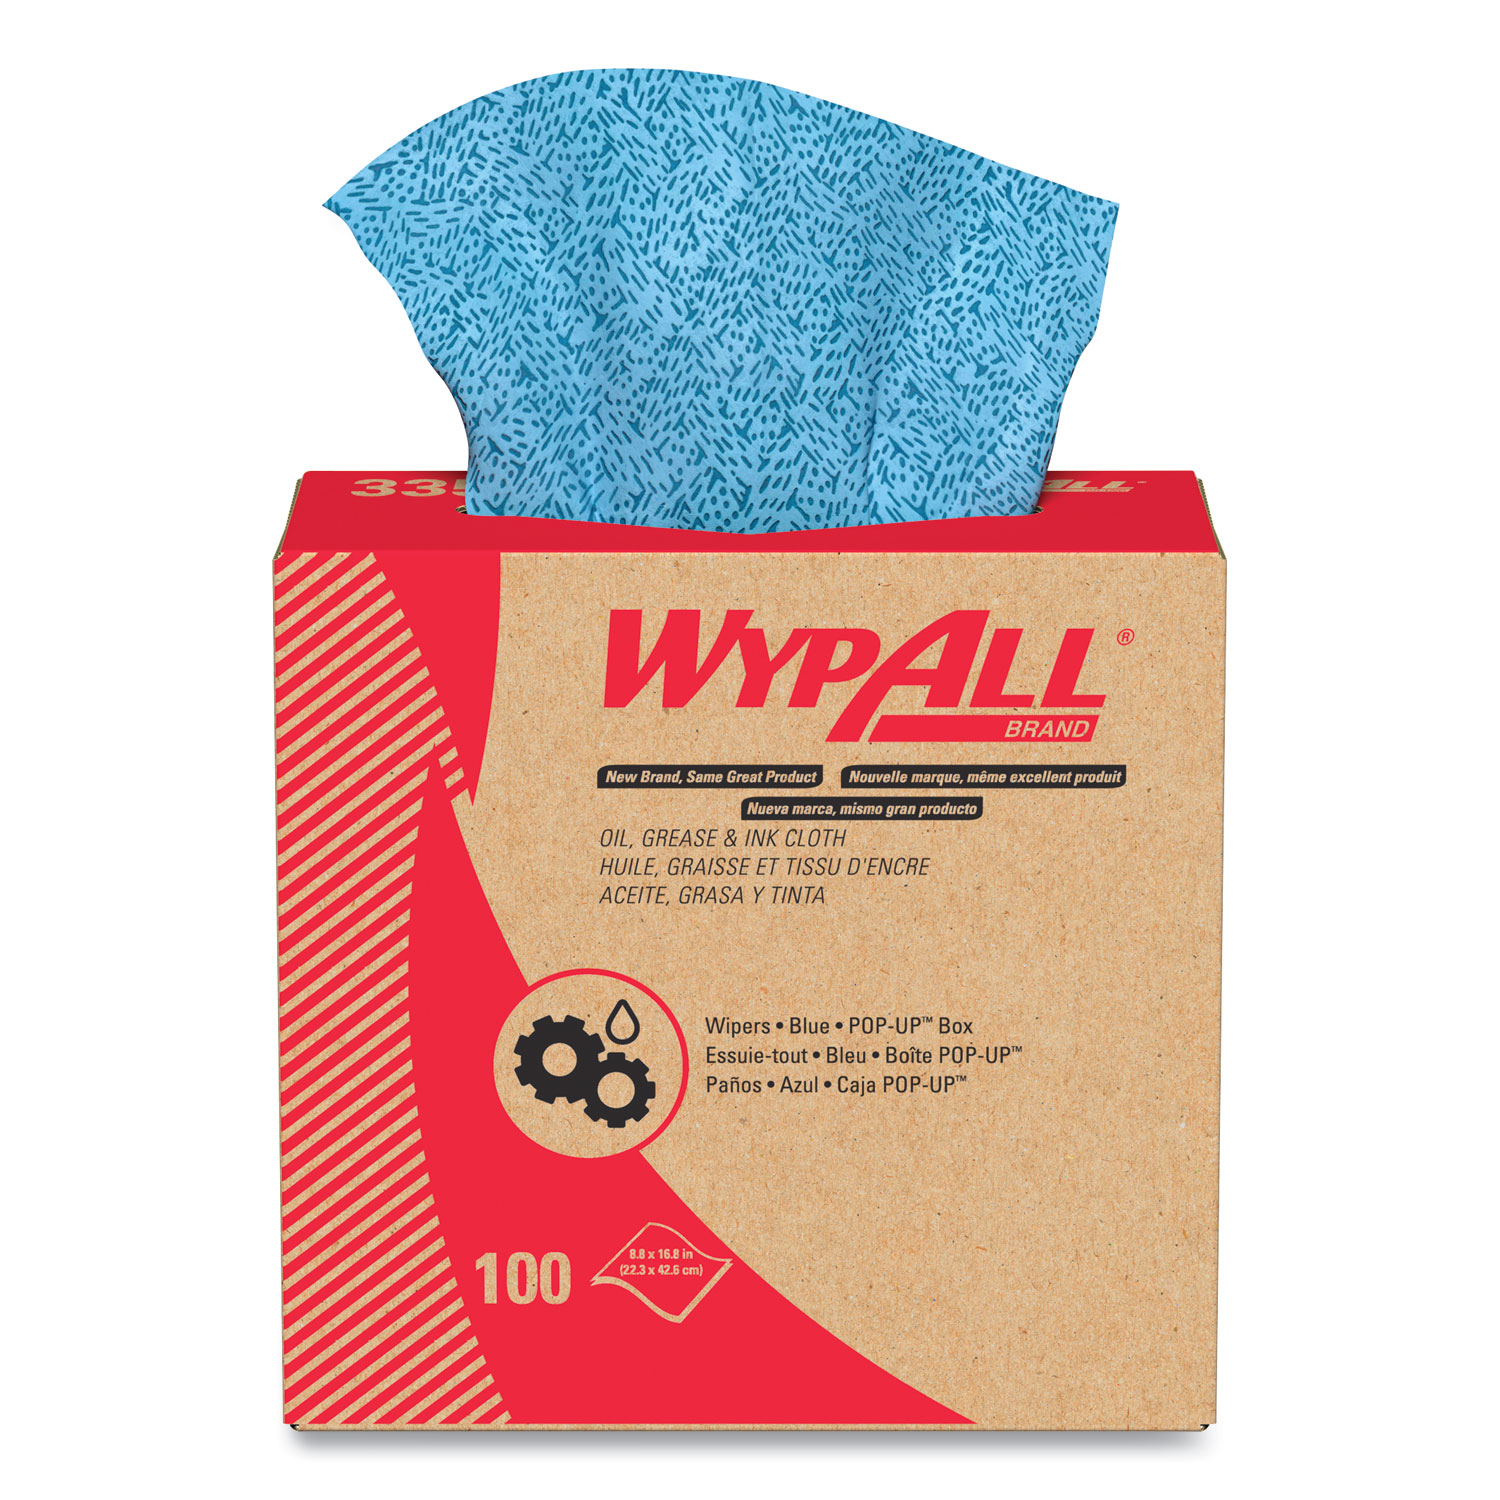  WypAll 33570 Oil, Grease and Ink Cloths, POP-UP Box, 8 4/5 x 16 4/5, Blue, 100/Box, 5/Carton (KCC33570) 